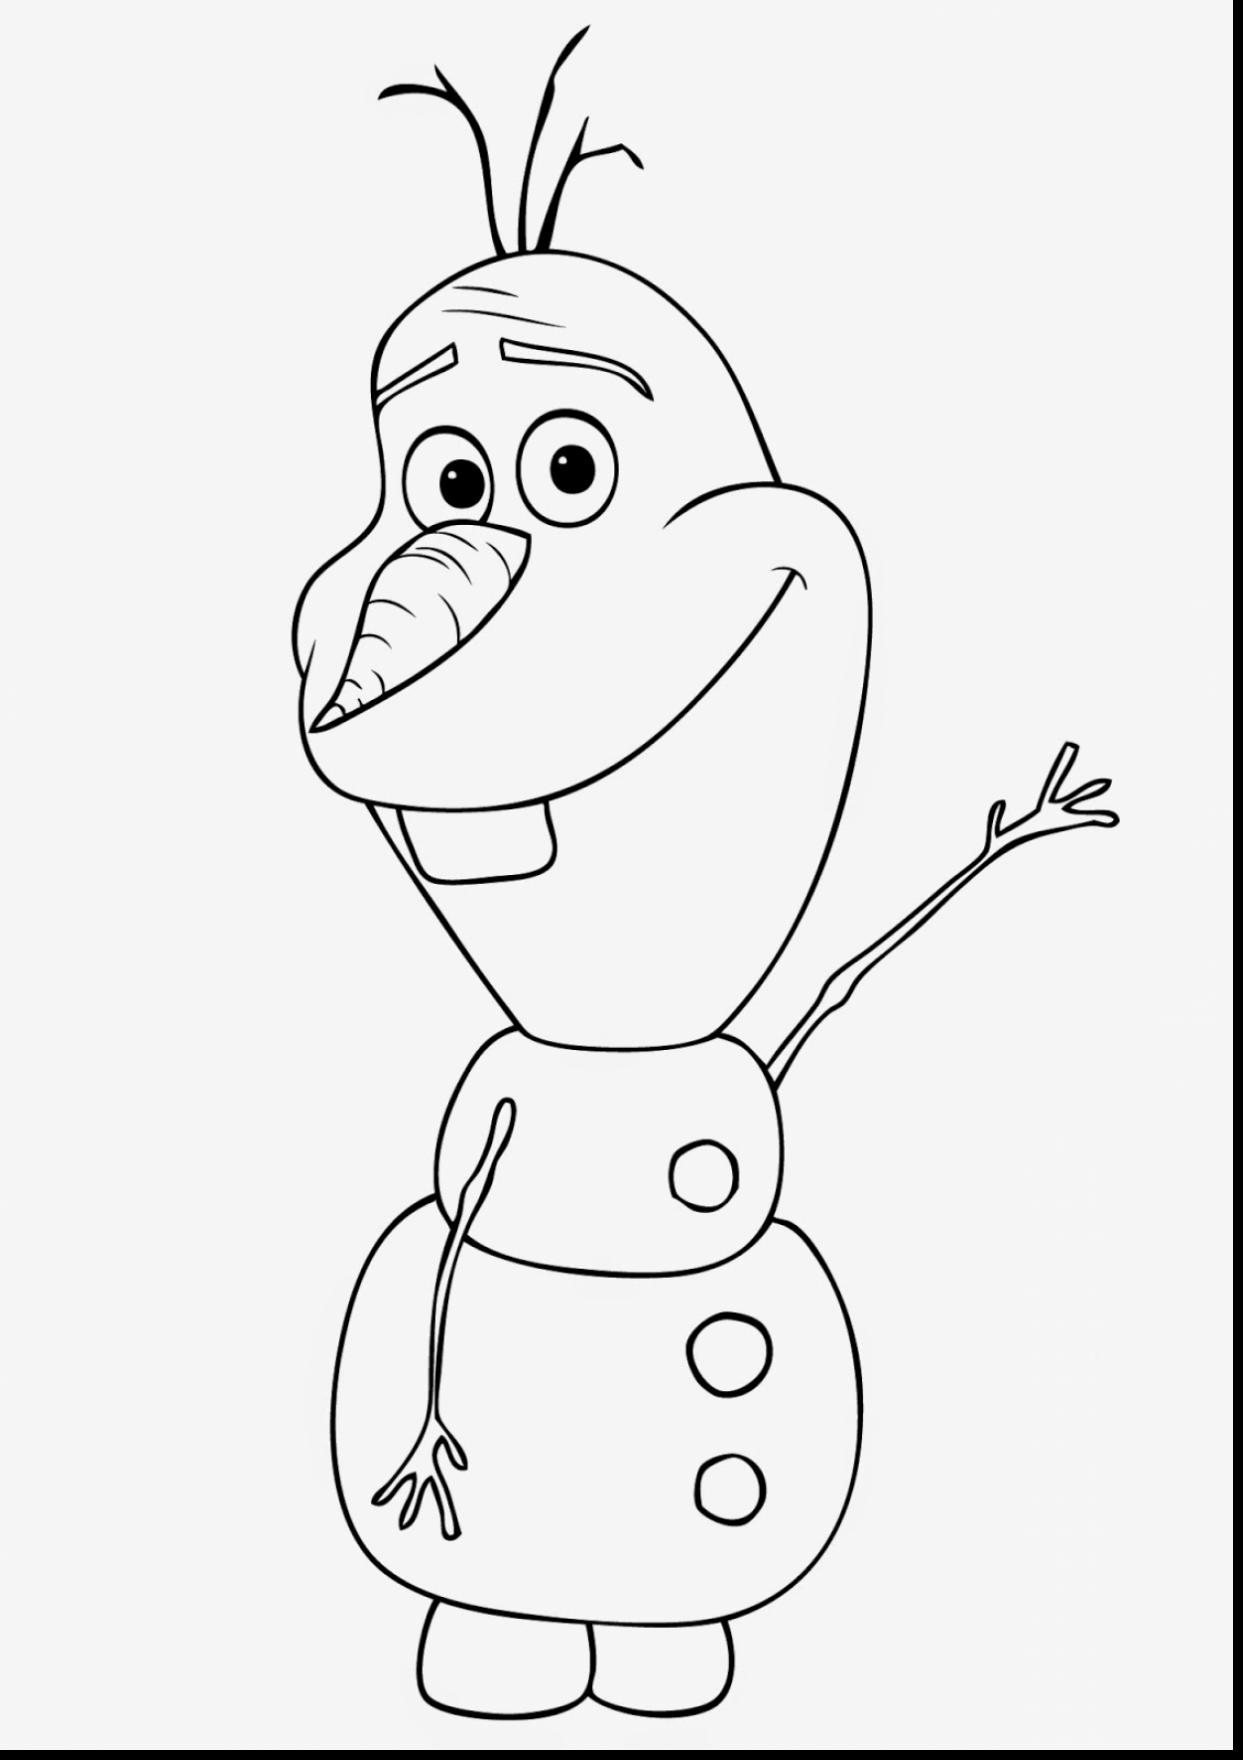 Olaf The Snowman Drawing at GetDrawings.com | Free for 